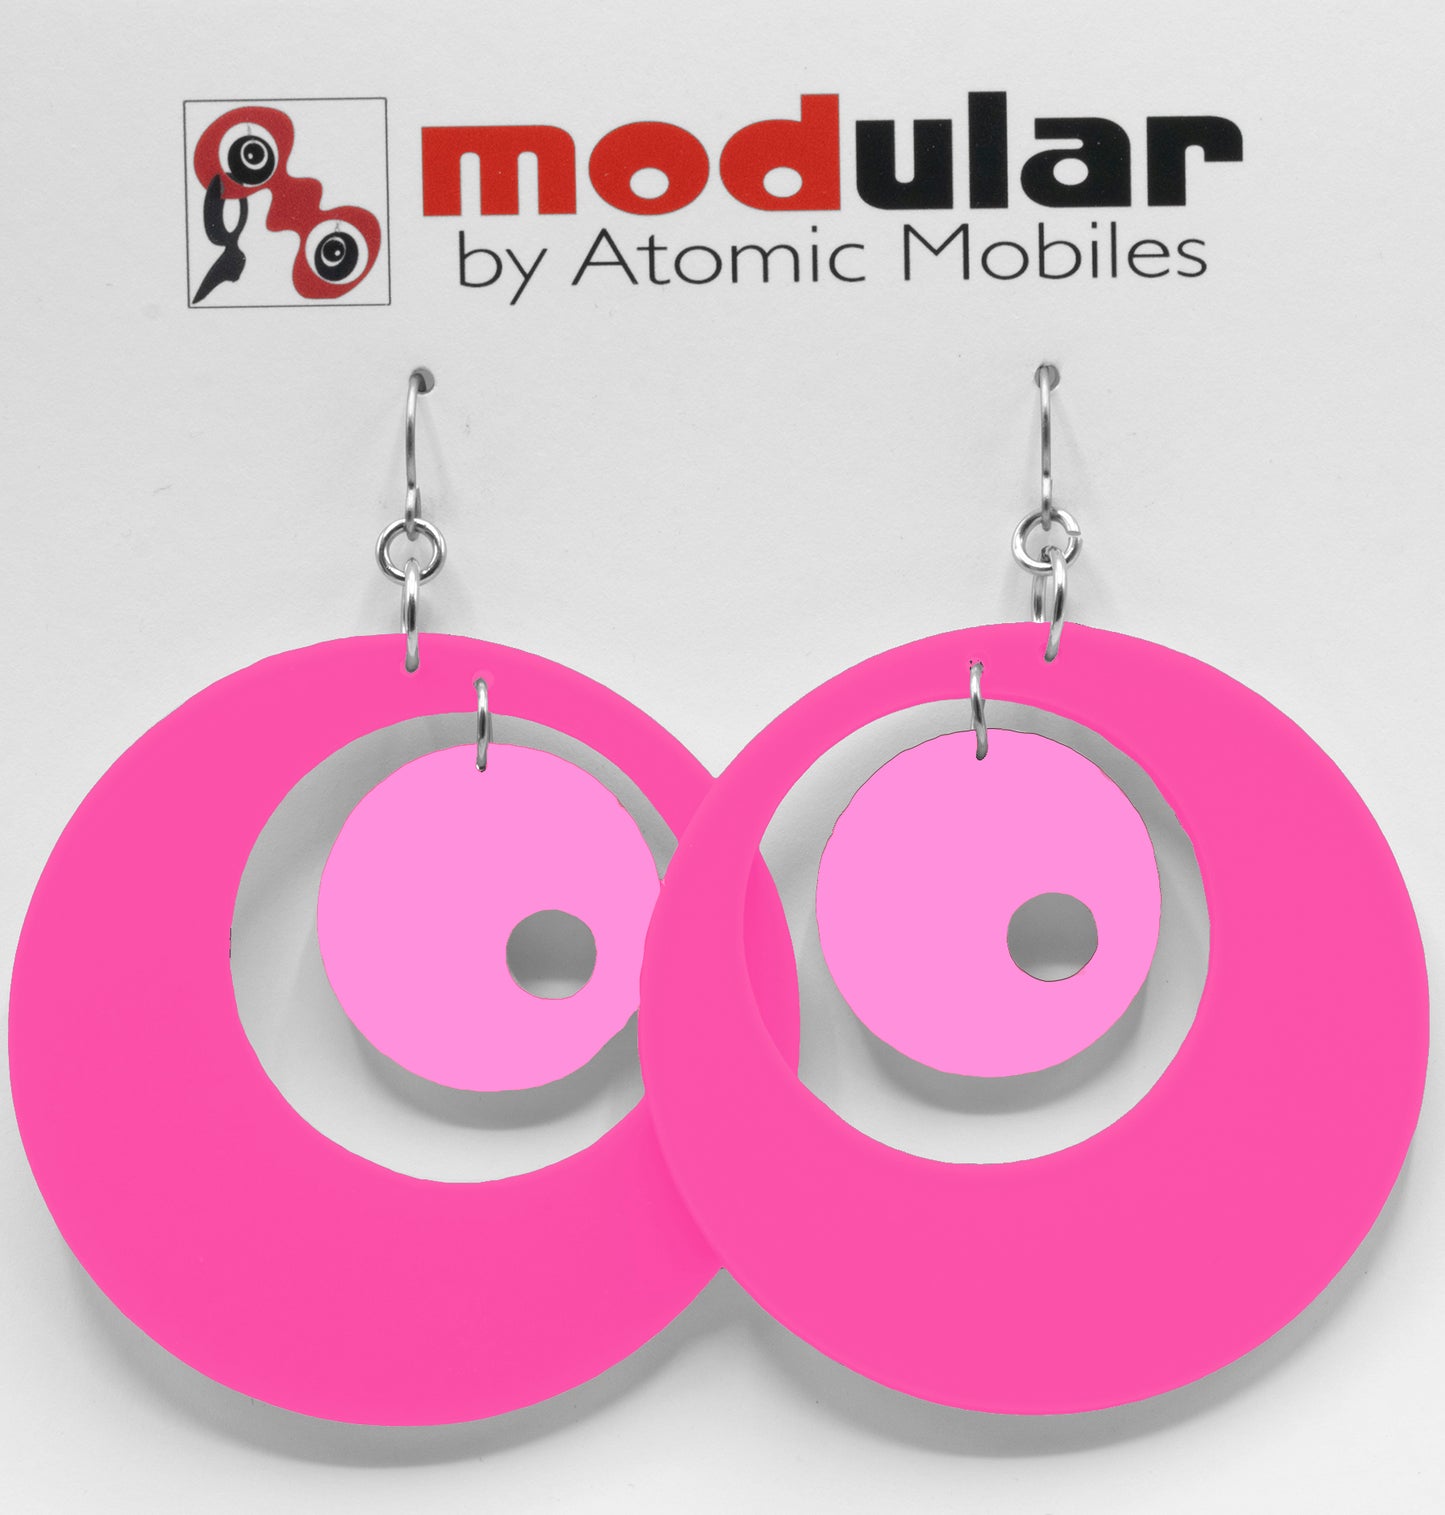 MODular Earrings - Groovy Statement Earrings in Hot Pink by AtomicMobiles.com - retro era inspired mod handmade jewelry